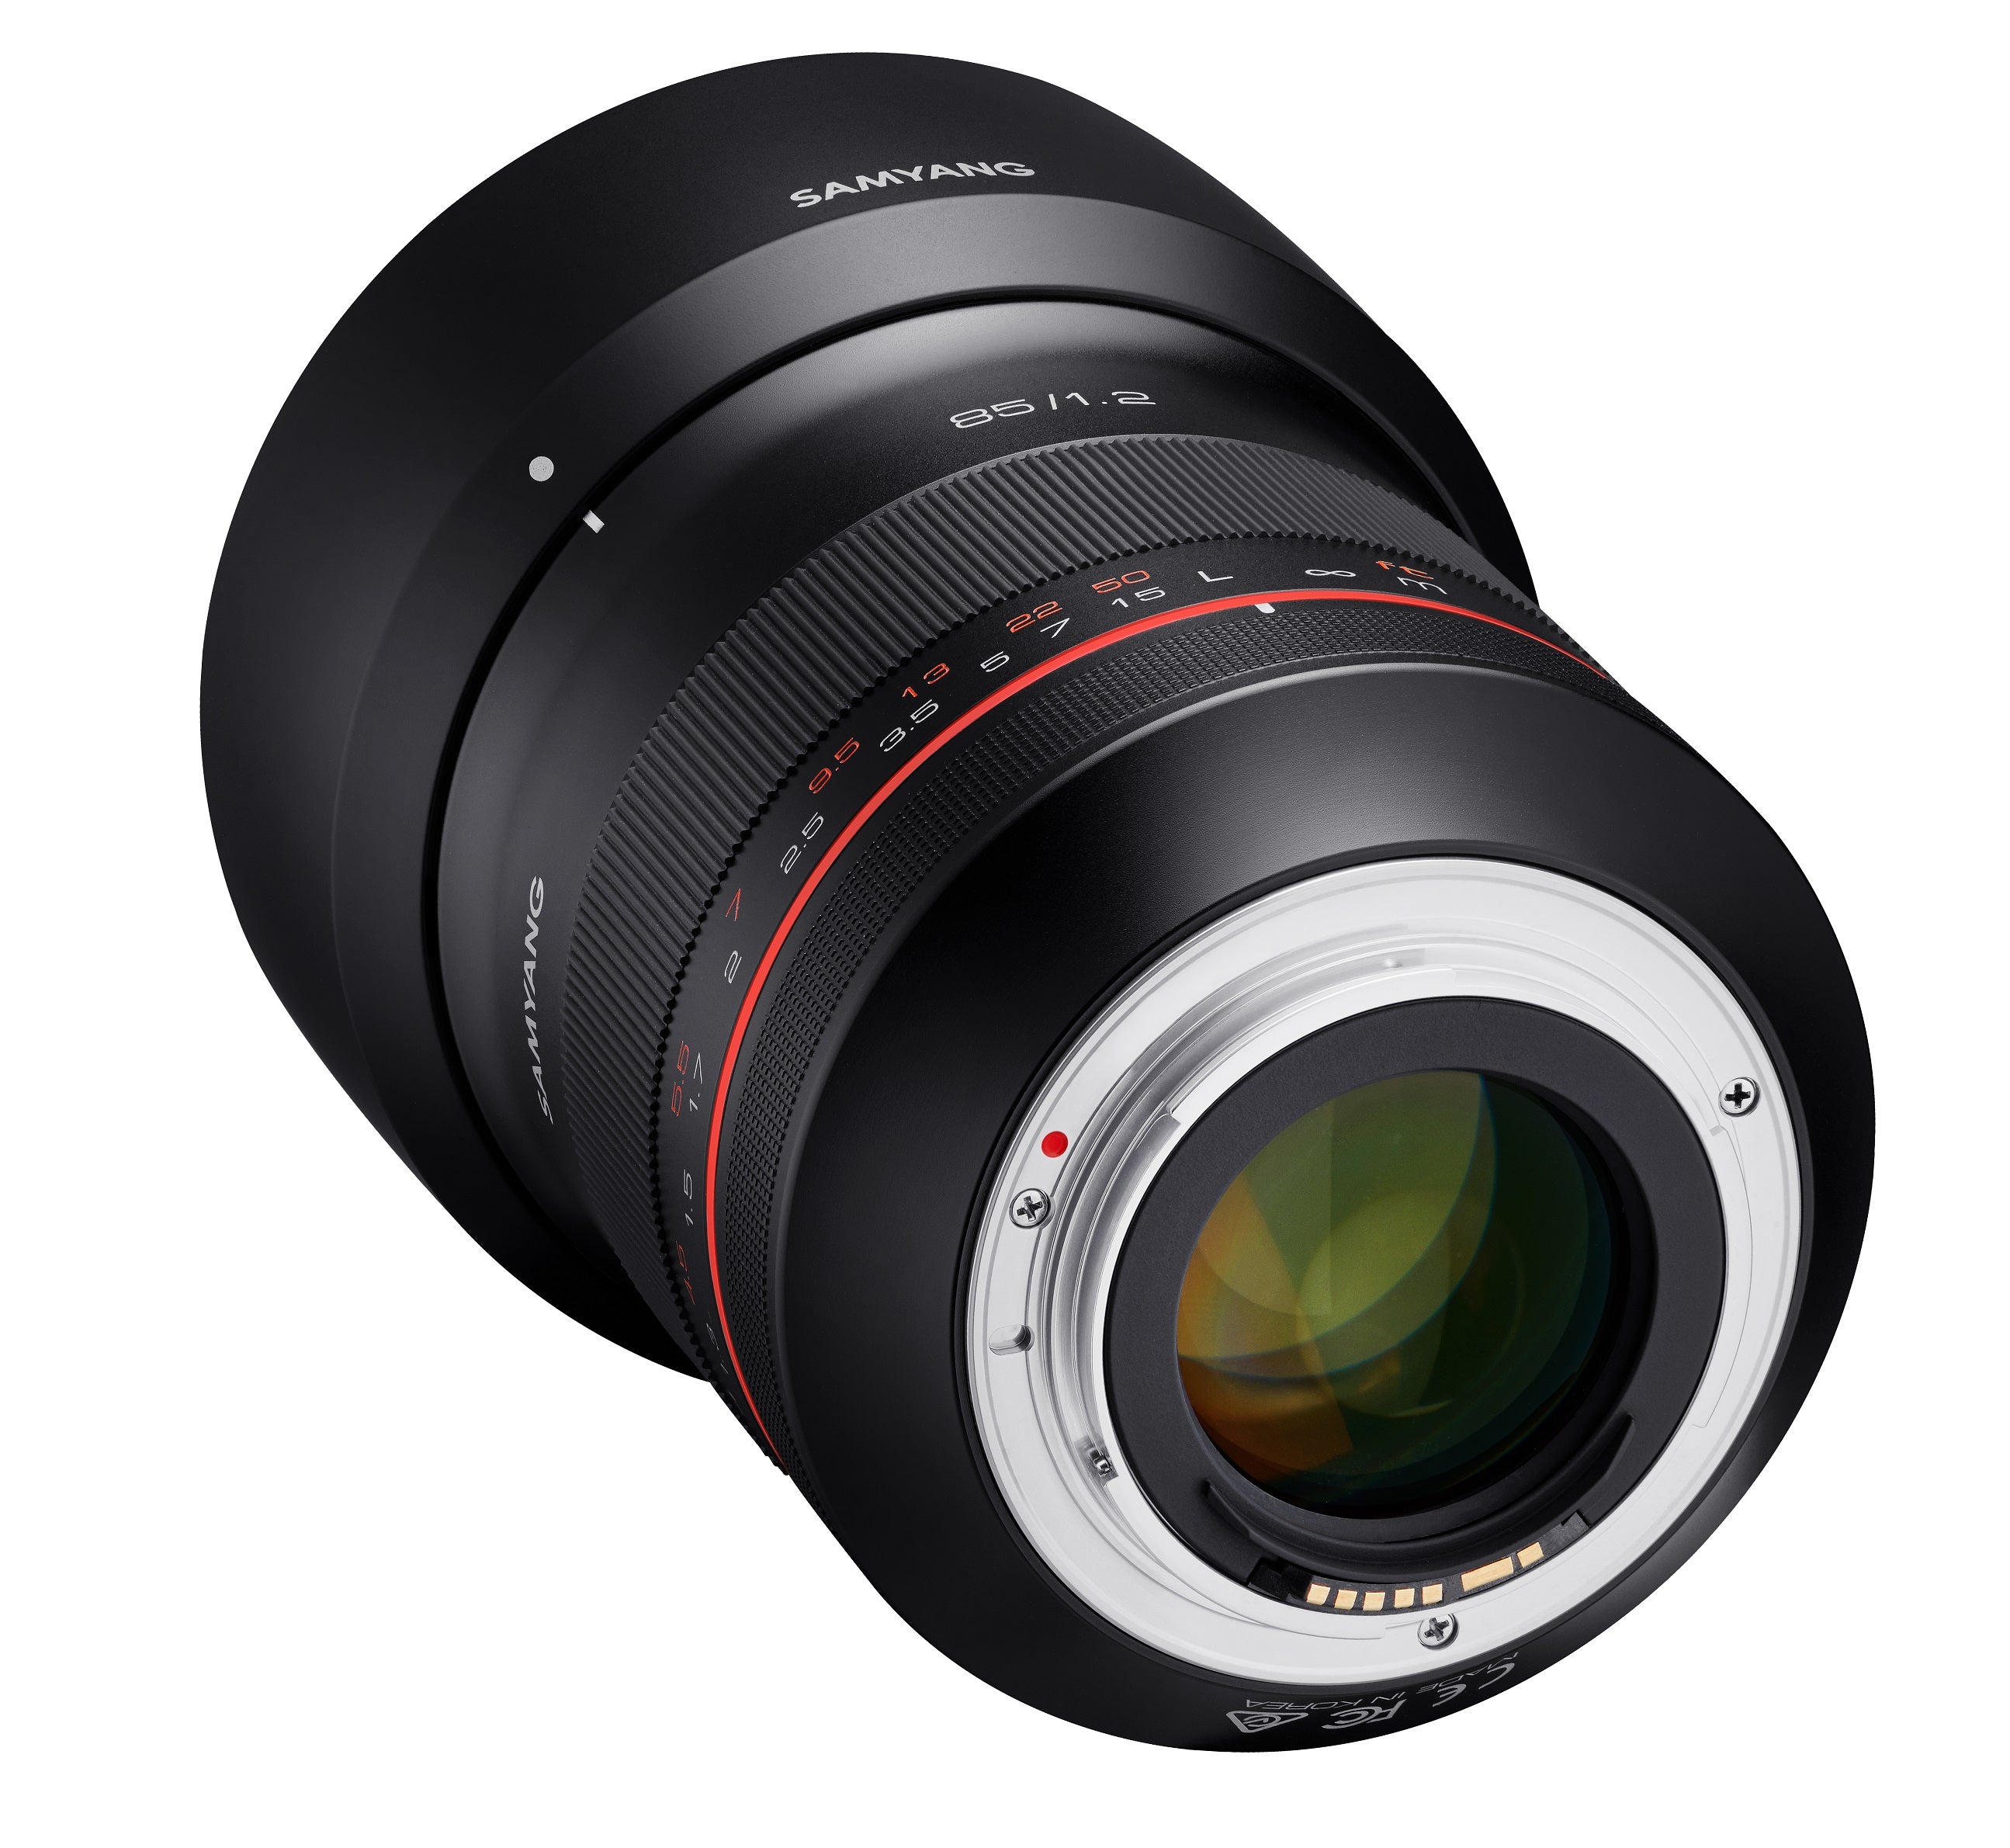 Samyang XP 85mm f1.2 AE Lens - Canon Fit